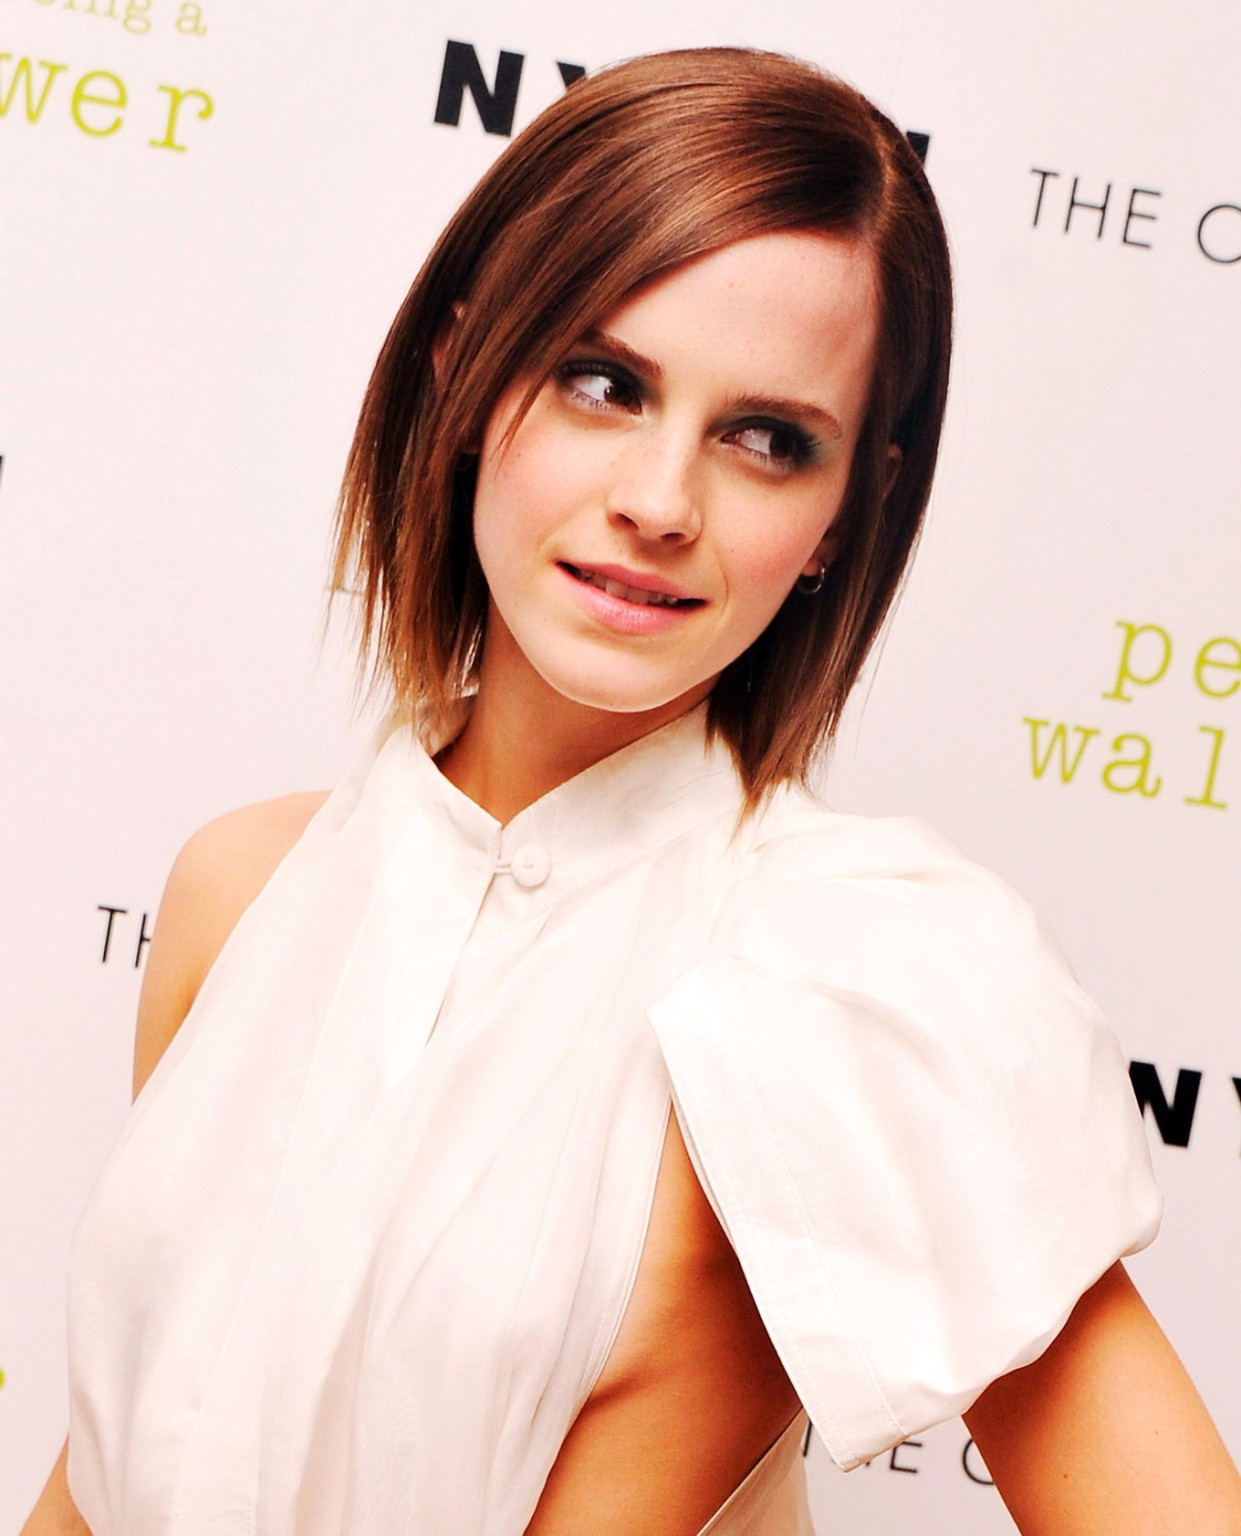 Emma Watson Leggy  Braless Showing Side Boob At 'The Perks Of Being A Wallflower